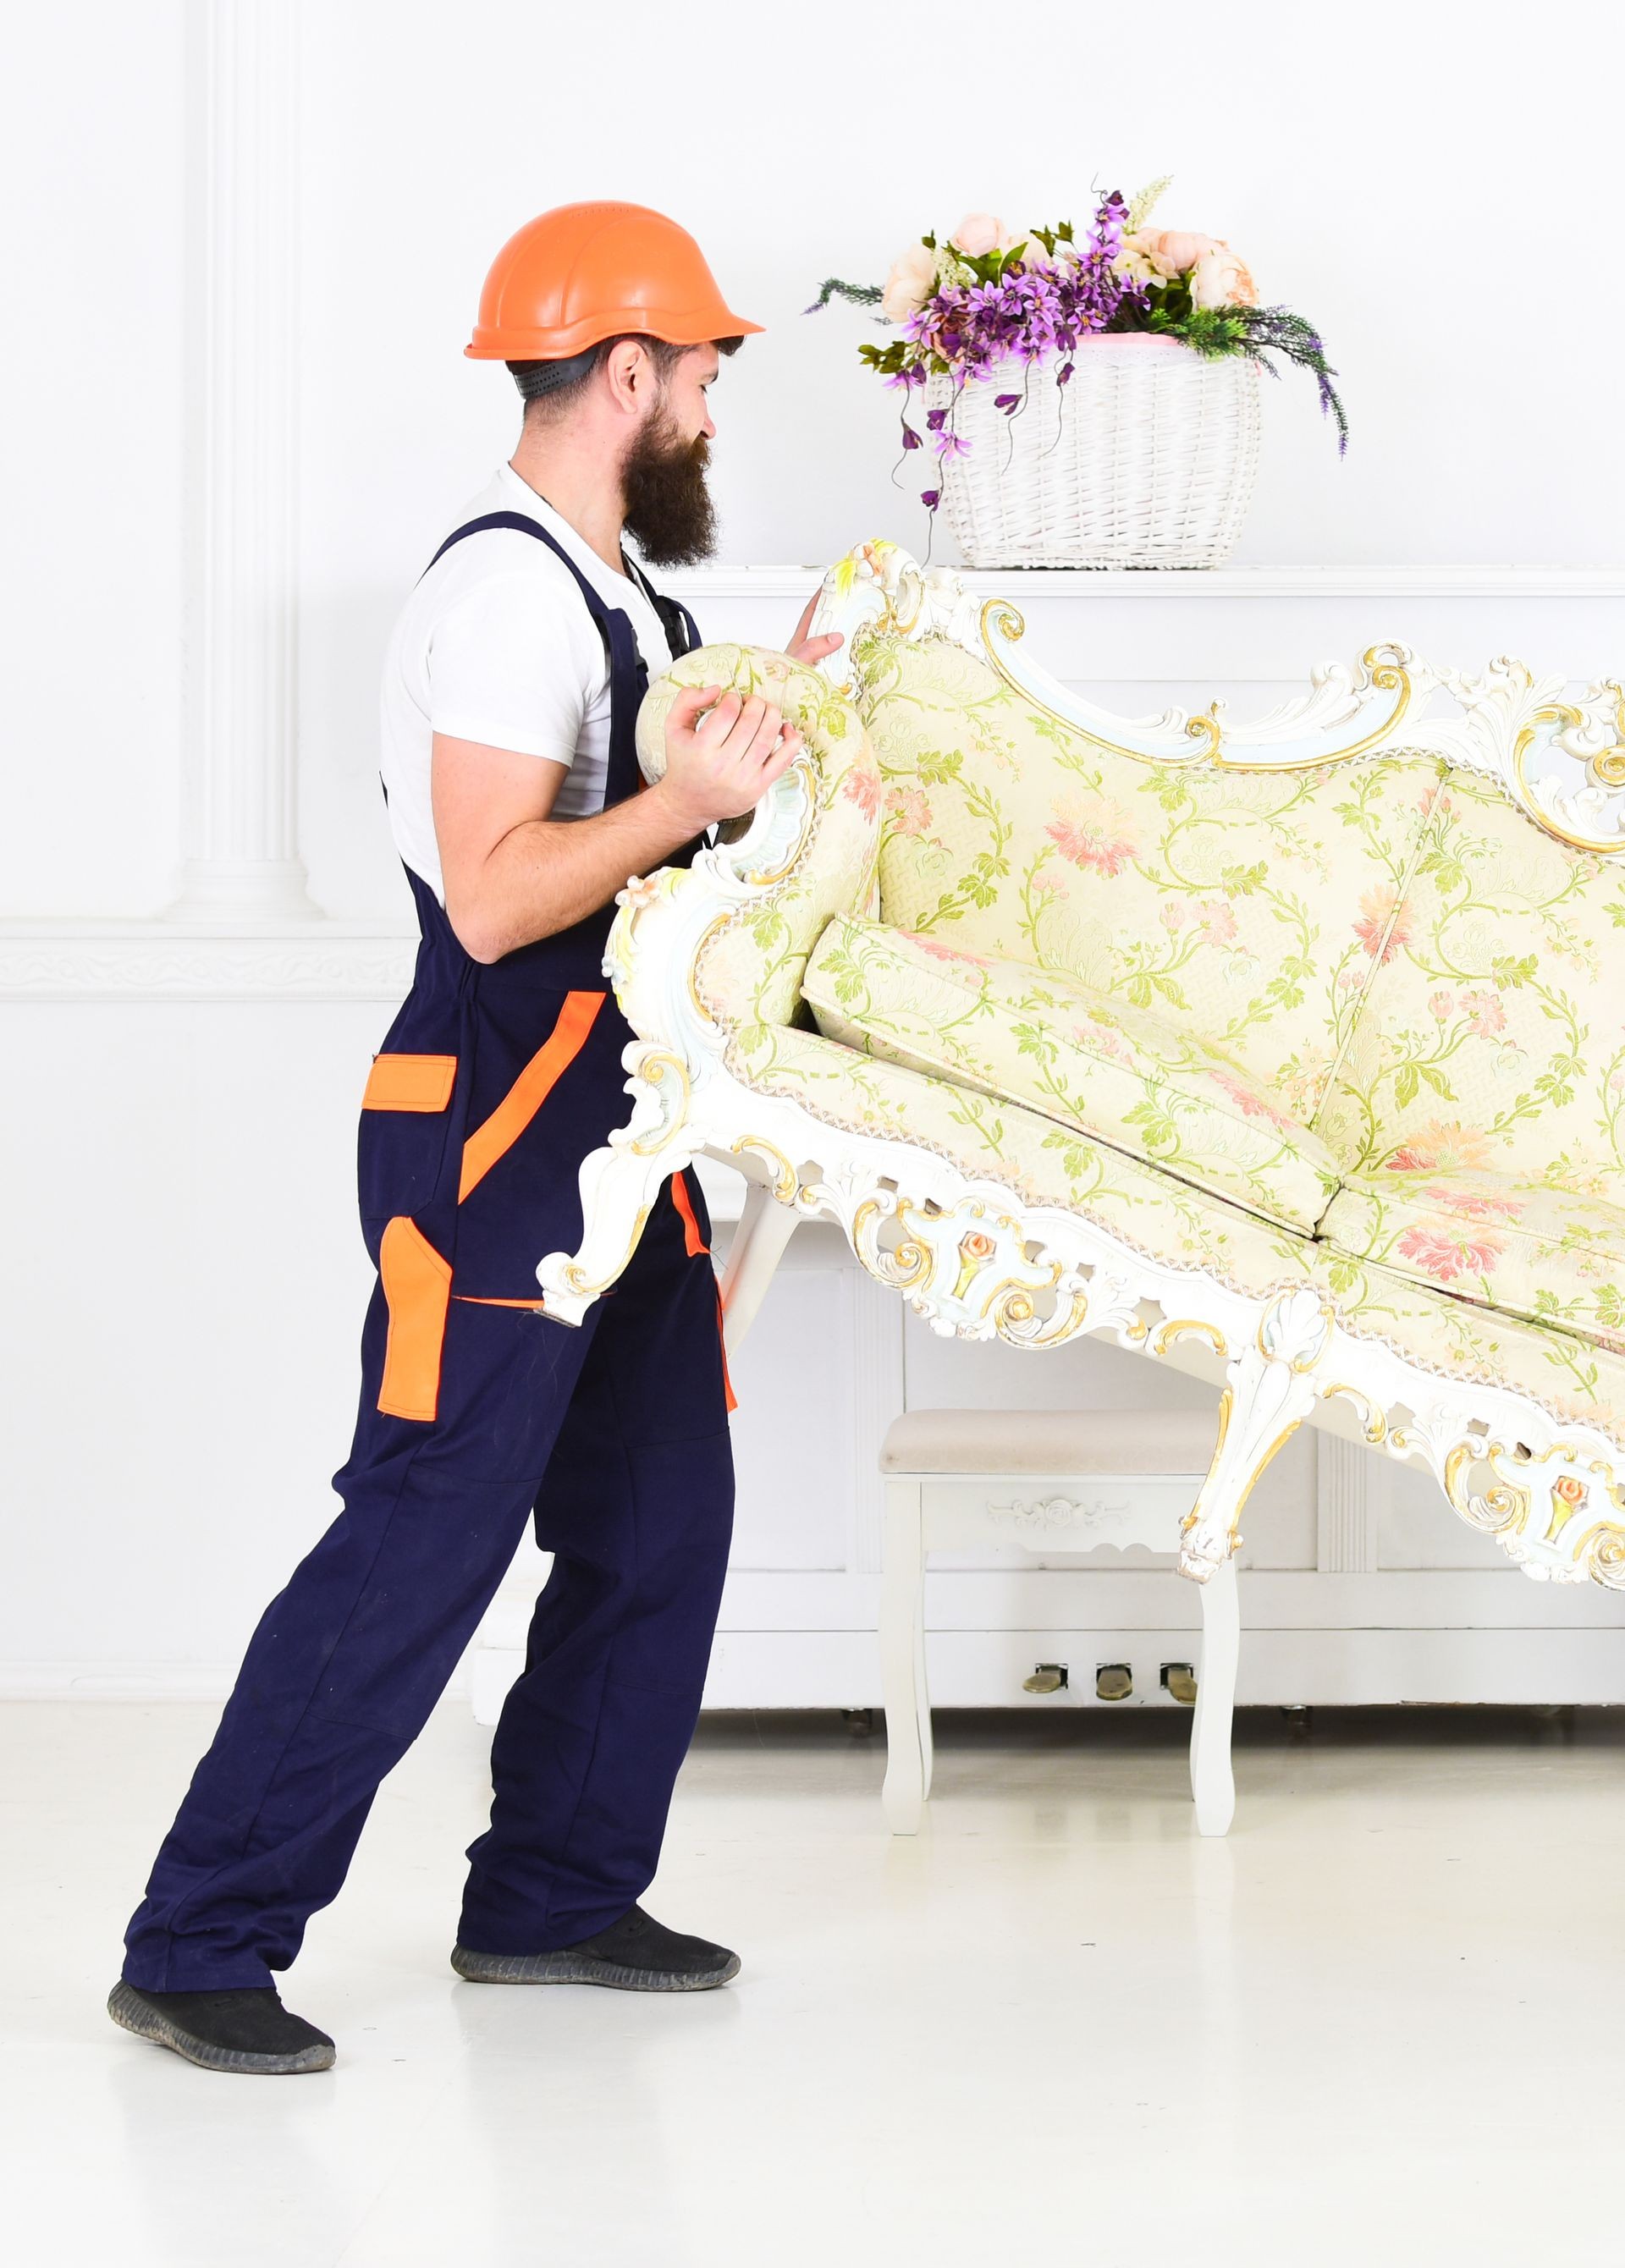 Loader moves sofa, couch. Man with beard, worker in overalls and helmet lifts up sofa, white background. Courier delivers furniture in case of move out, relocation. Delivery service concept.